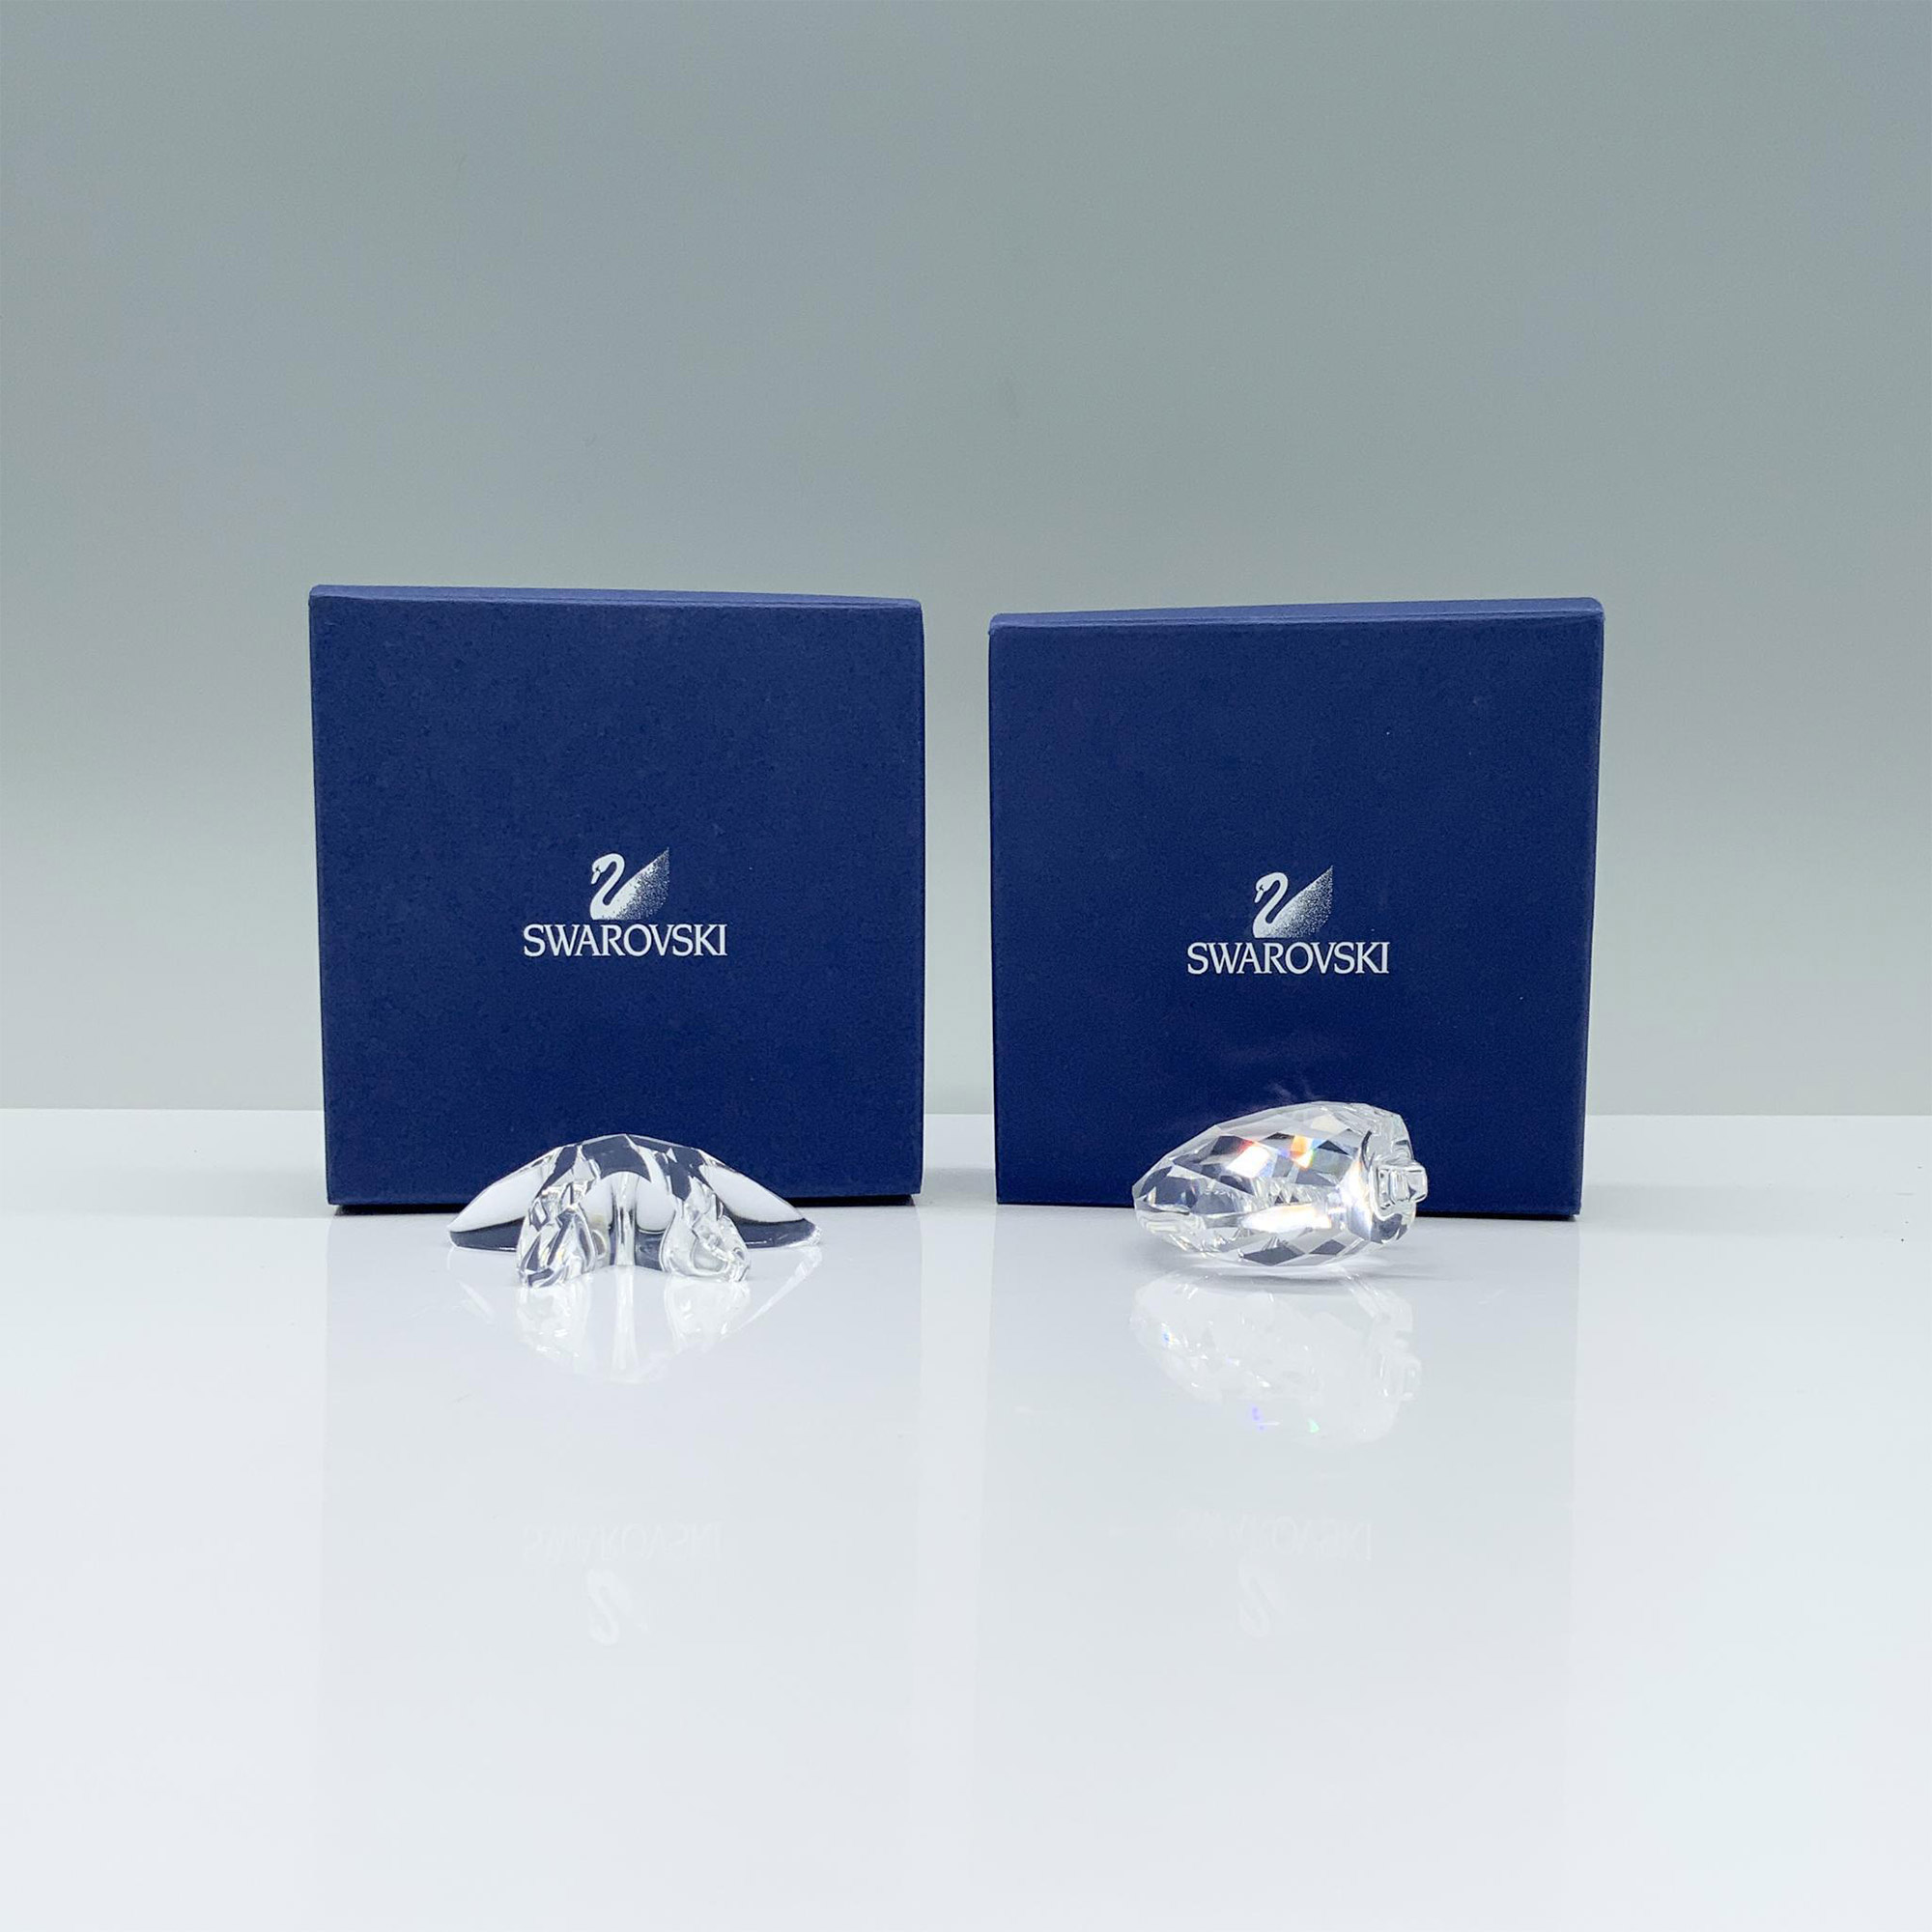 2pc Swarovski Crystal Paperweights, Scallop and Starfish - Image 4 of 4